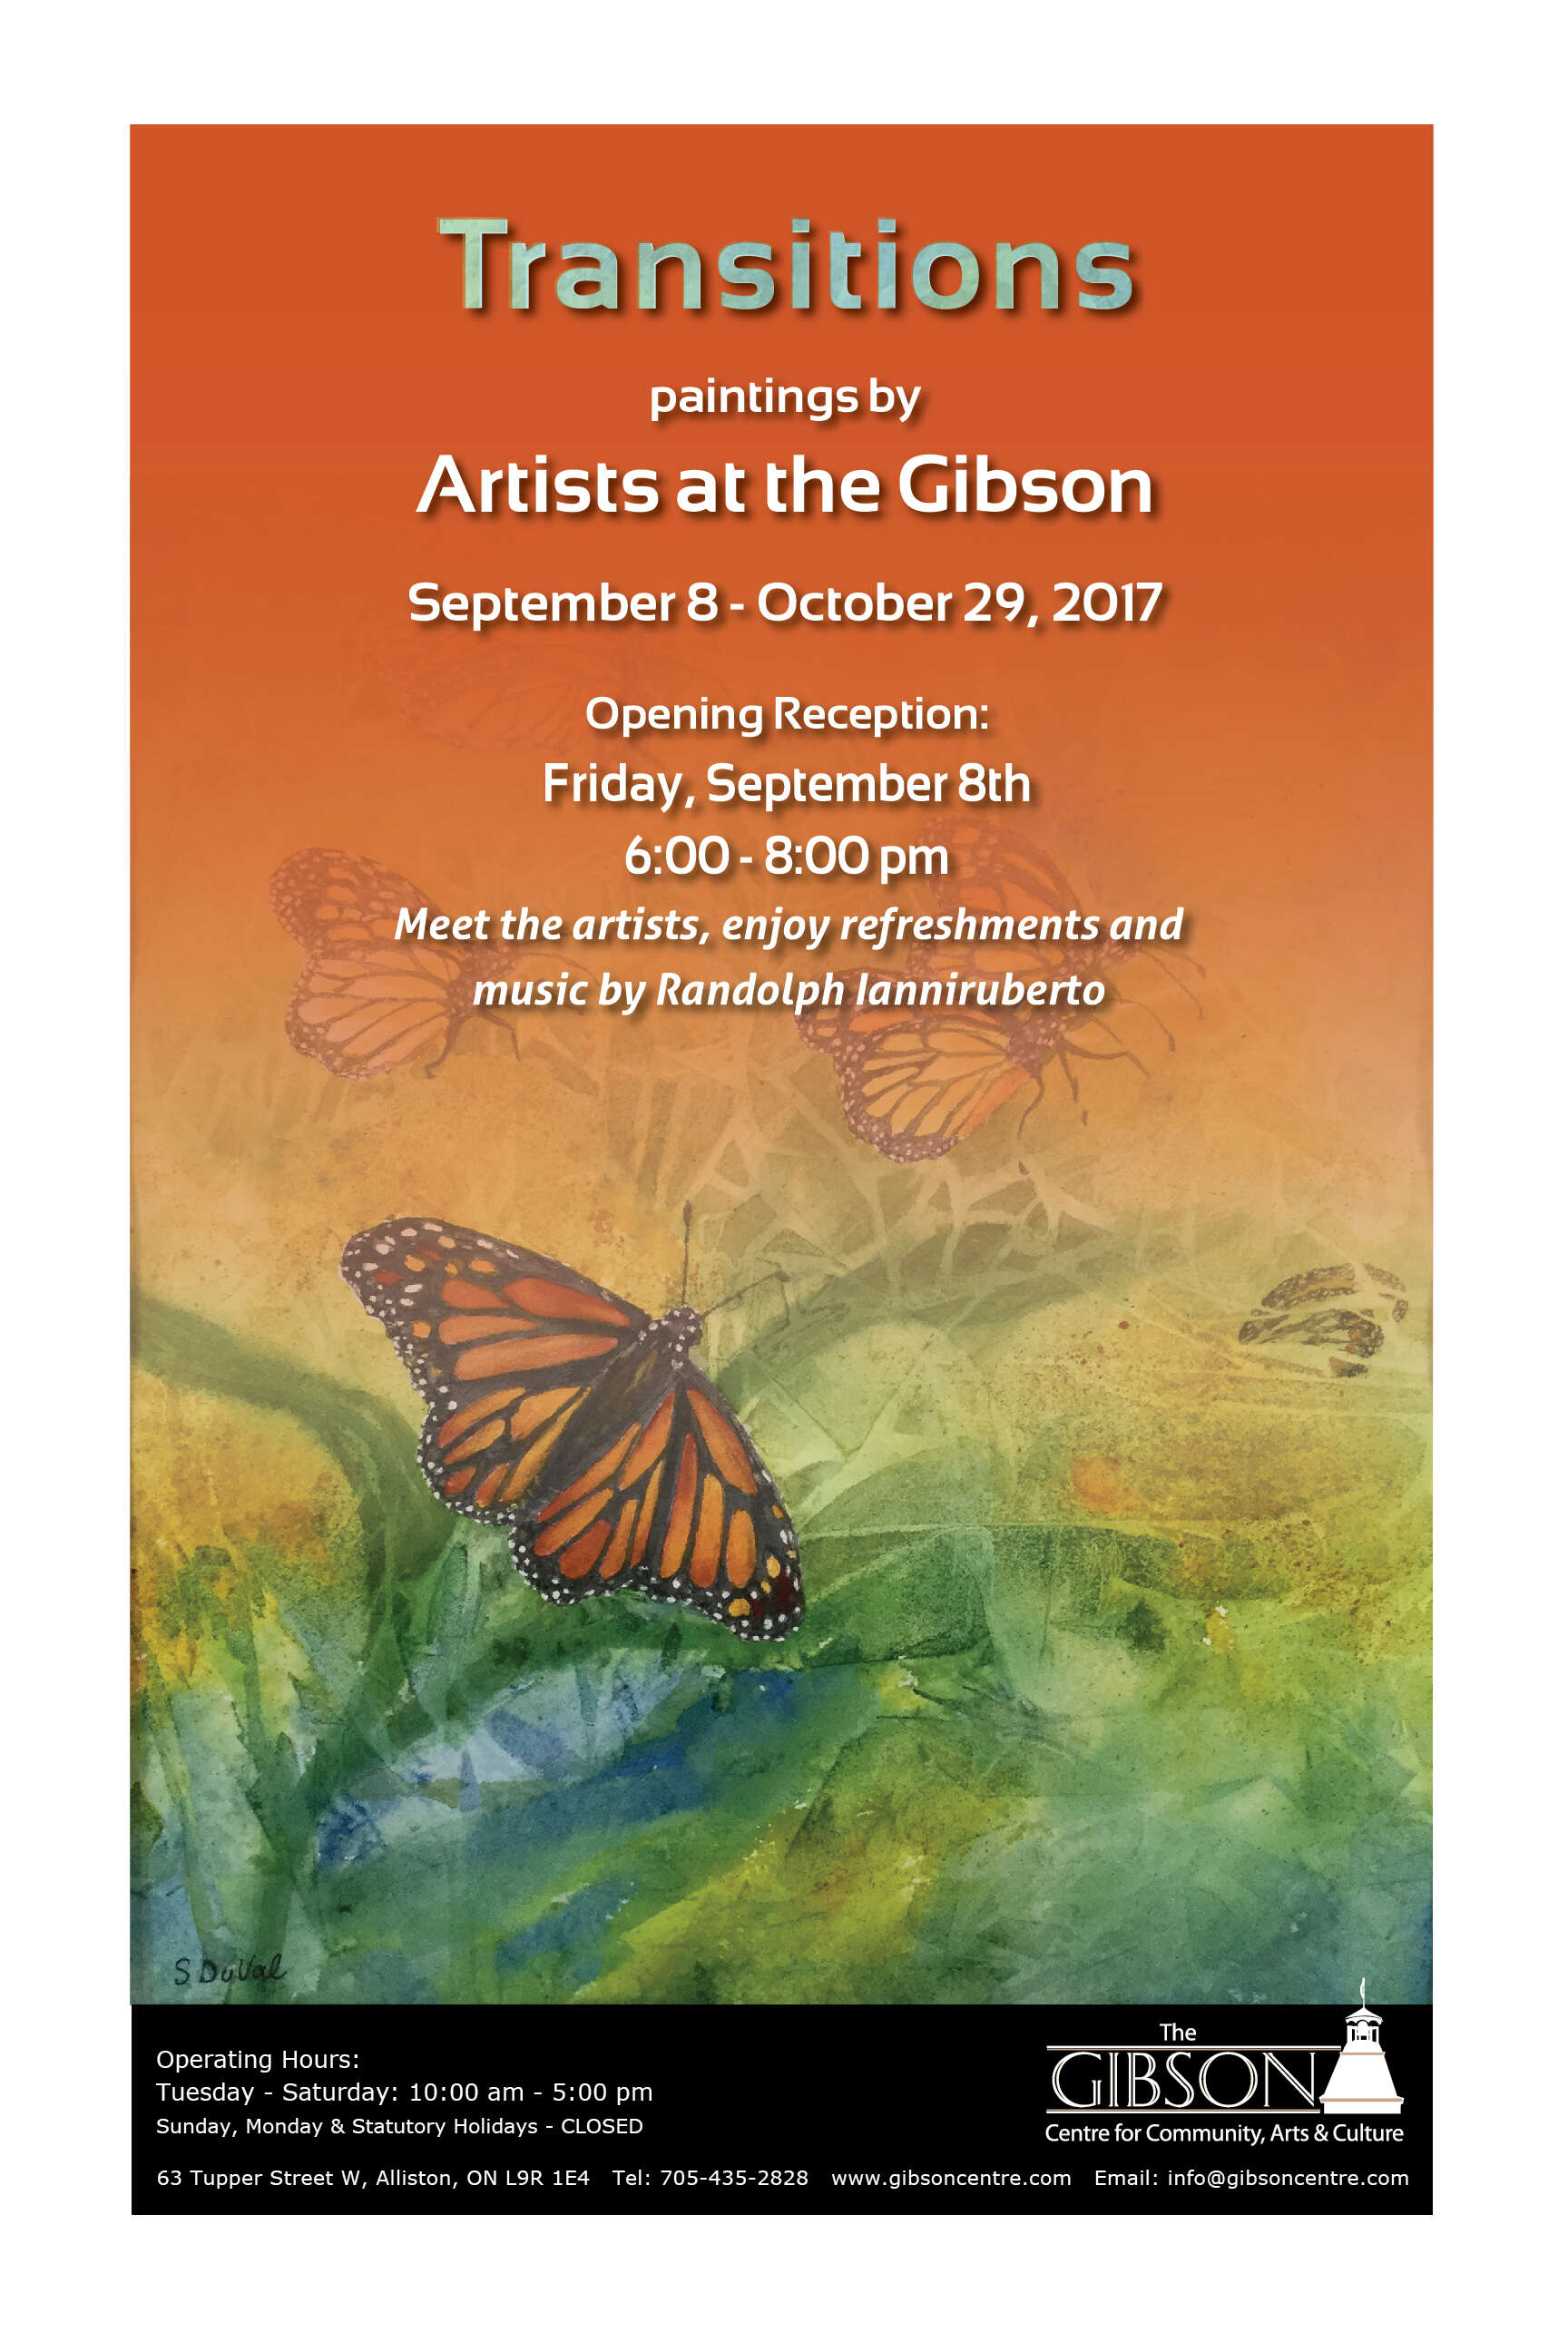 Transitions - paintings by Artists at the Gibson